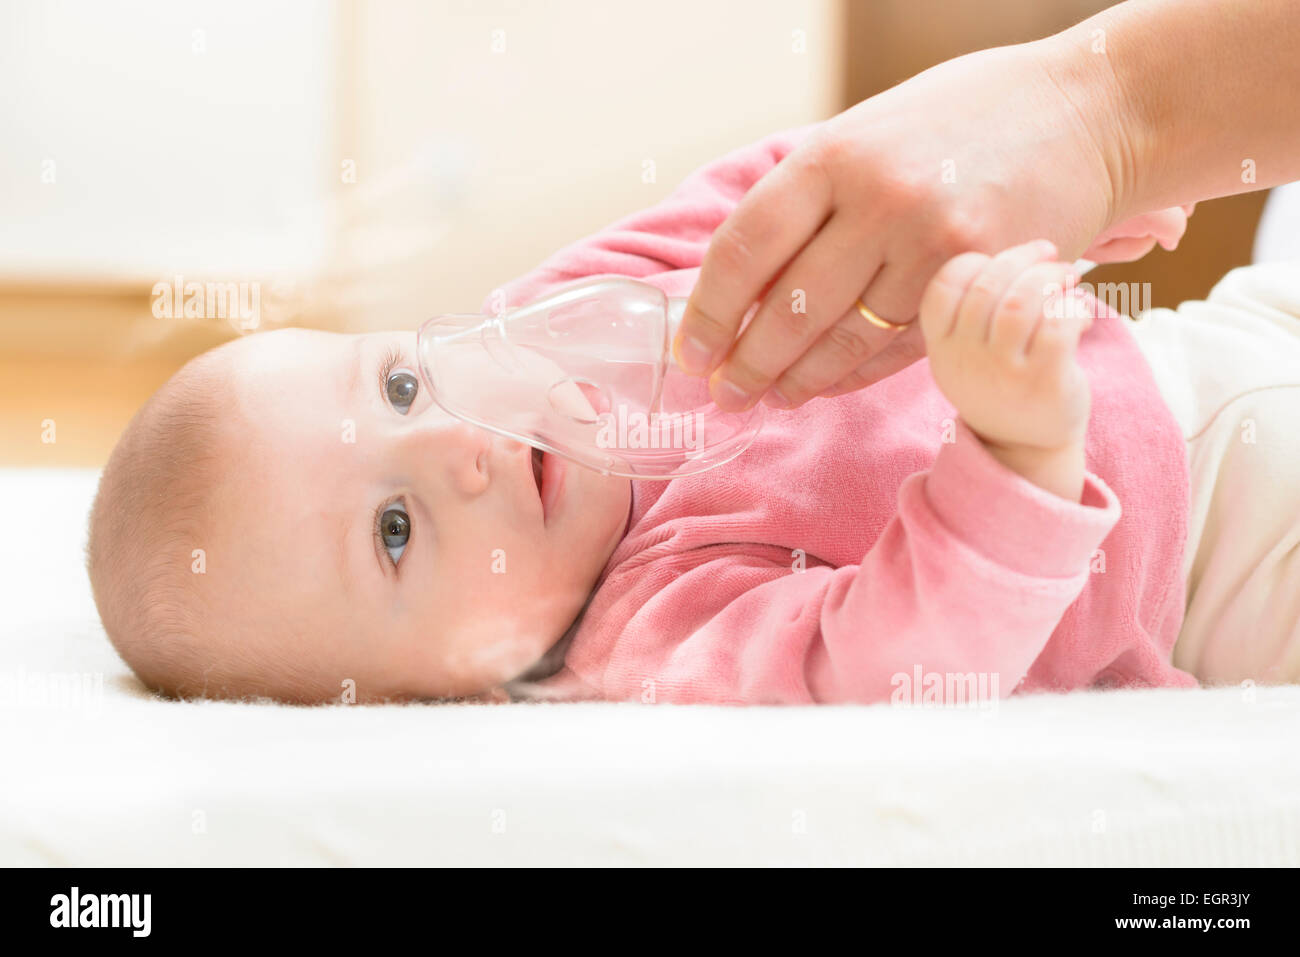 Baby taking respiratory therapy. Hand holding the mask of a nebuliser. Stock Photo